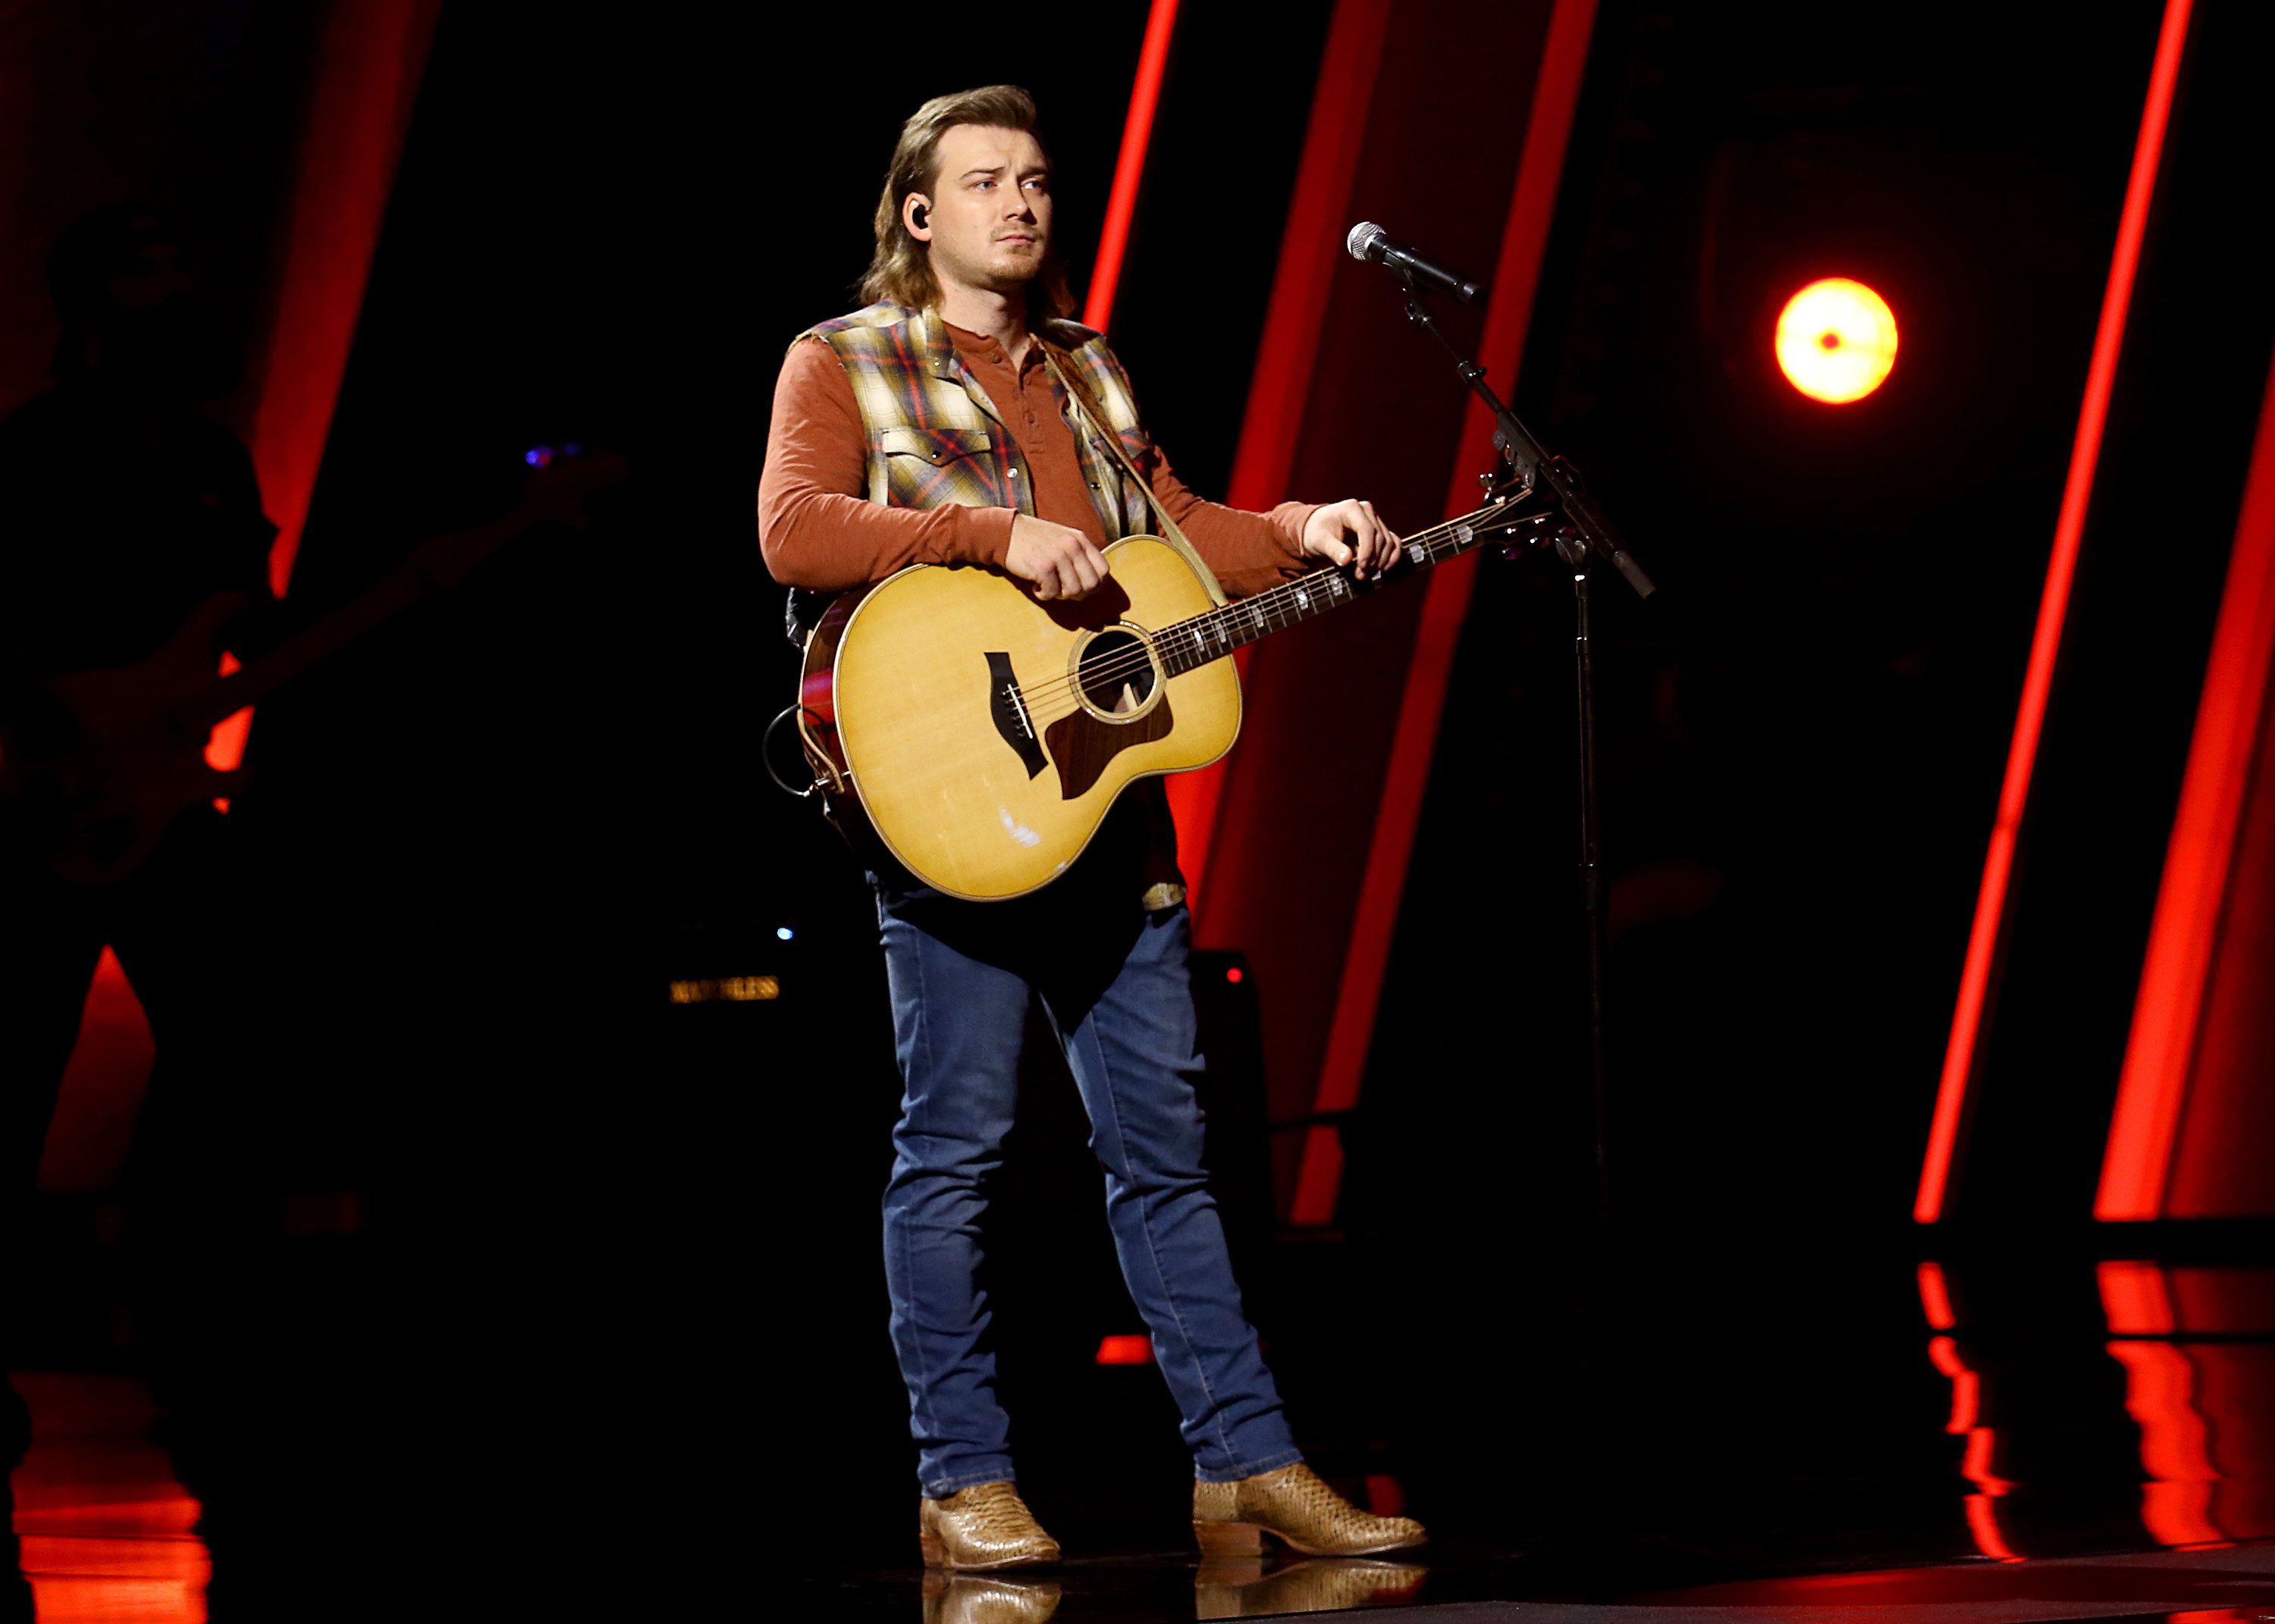 Morgan Wallen performs onstage at Nashville’s Music City Center for “The 54th Annual CMA Awards”